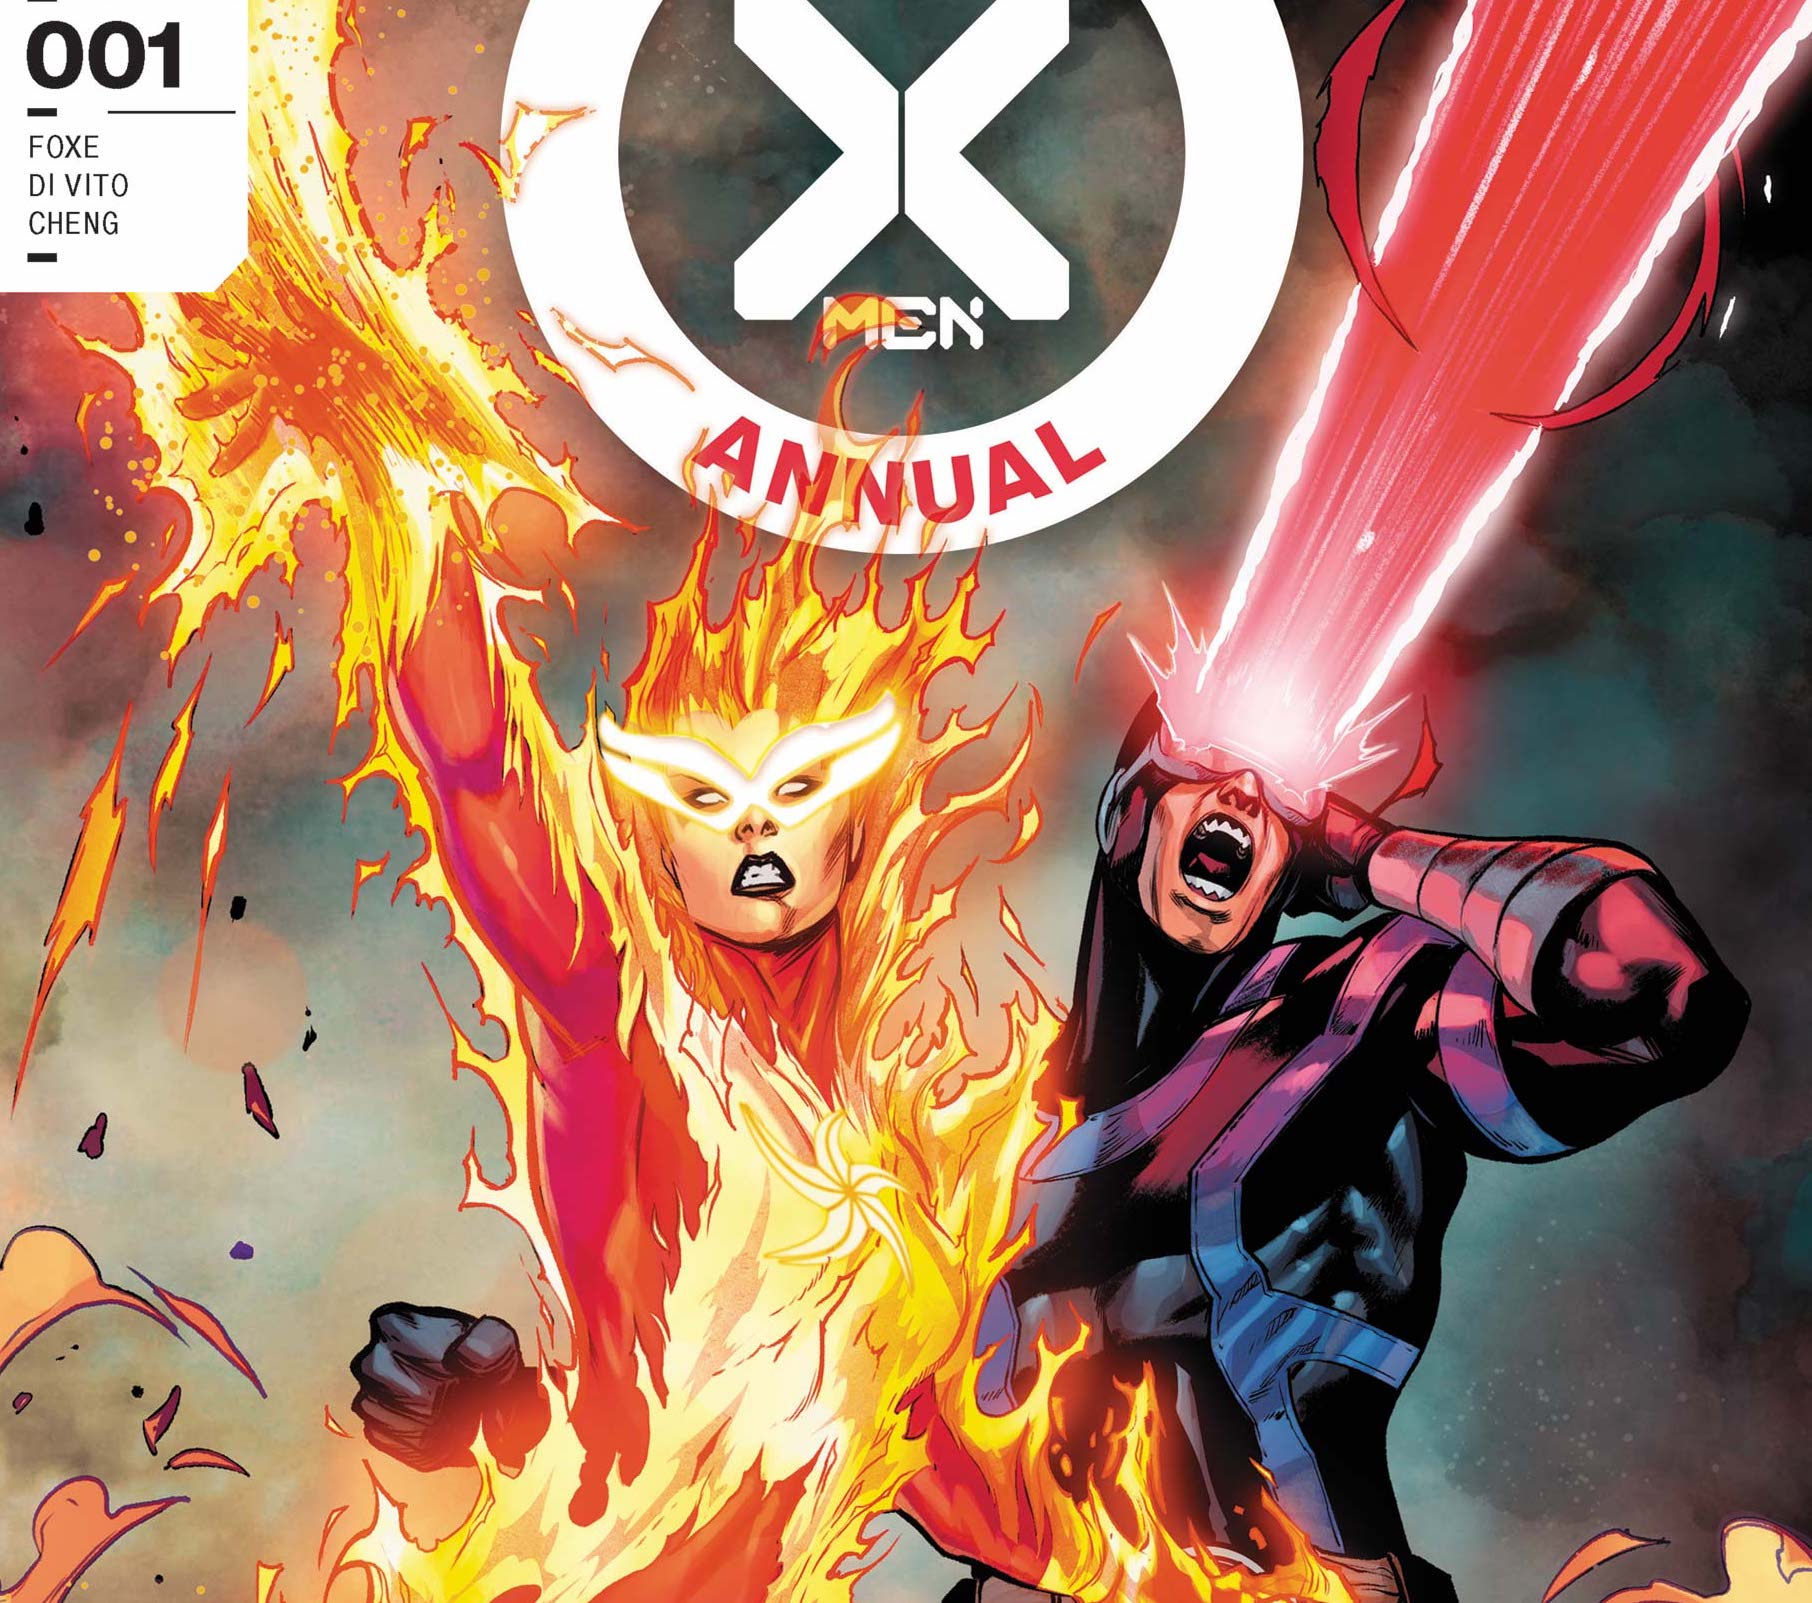 'X-Men Annual' #1 shows a busy life for the mutant super team